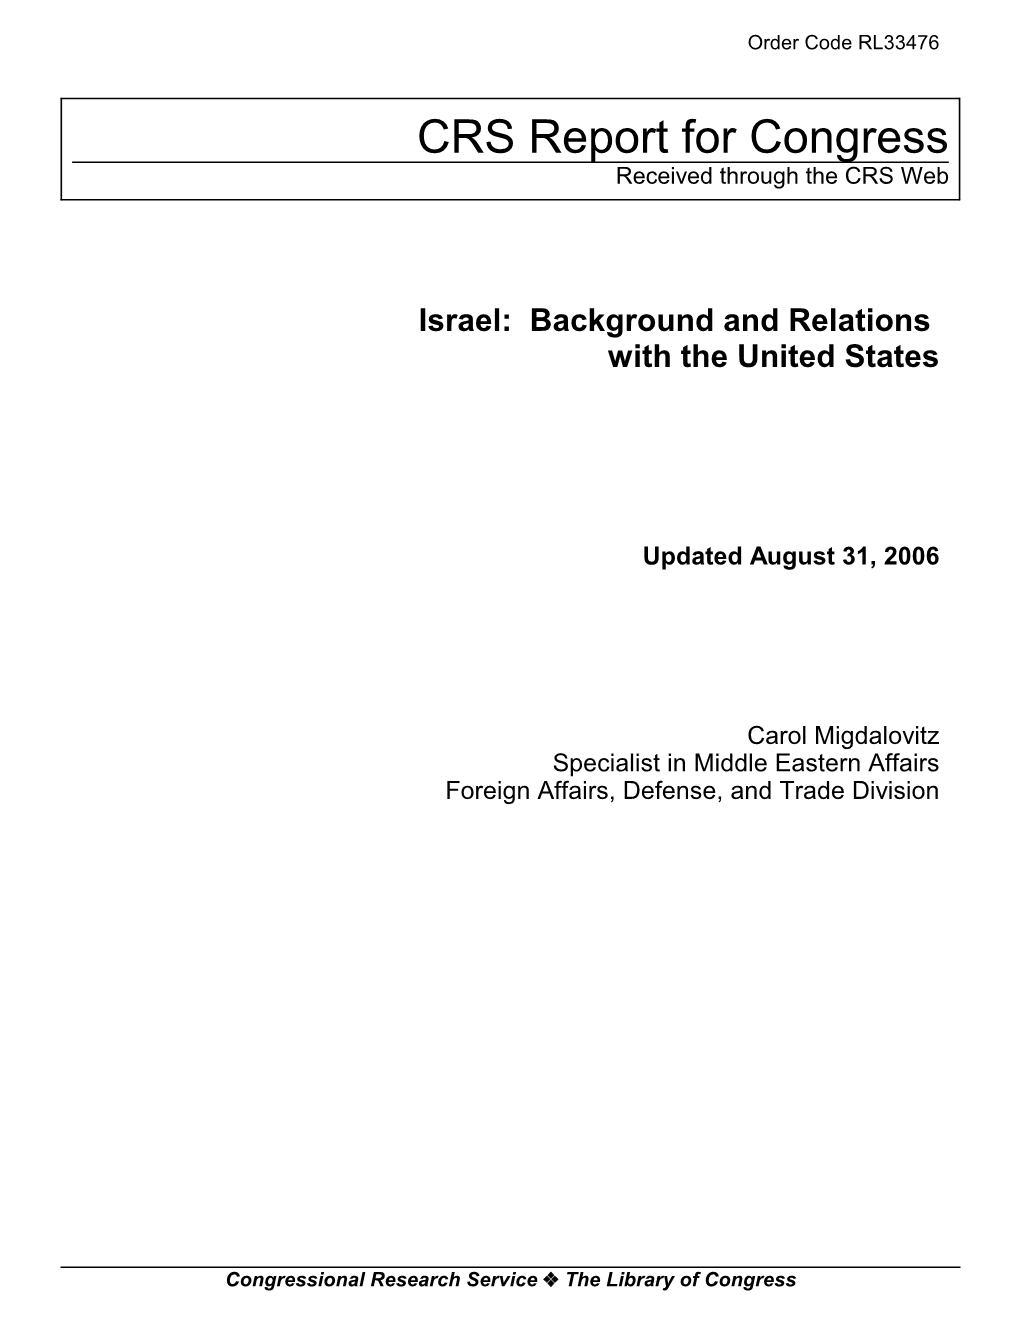 Israel: Background and Relations with the United States